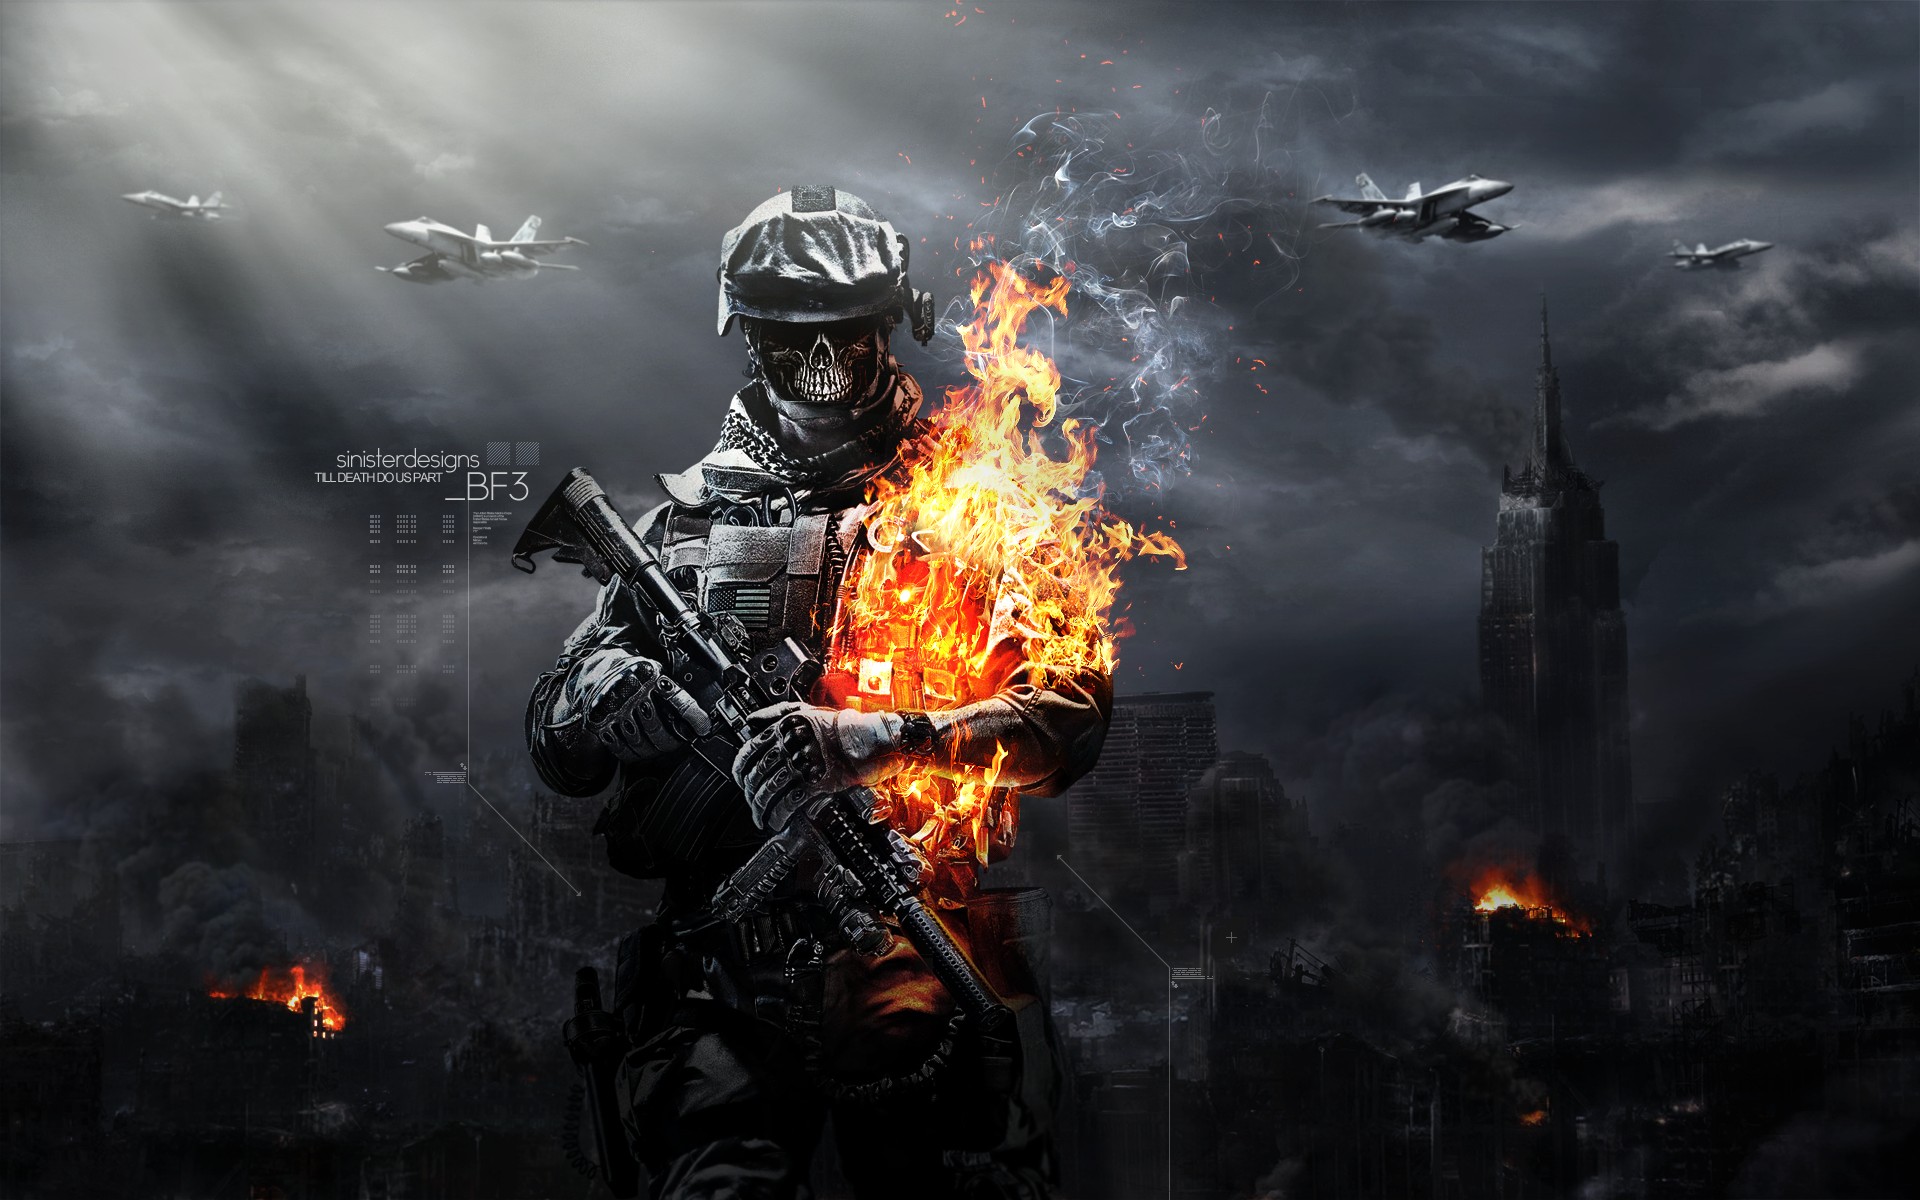 battlefield 3 wallpaper hd,action adventure game,pc game,event,shooter game,strategy video game